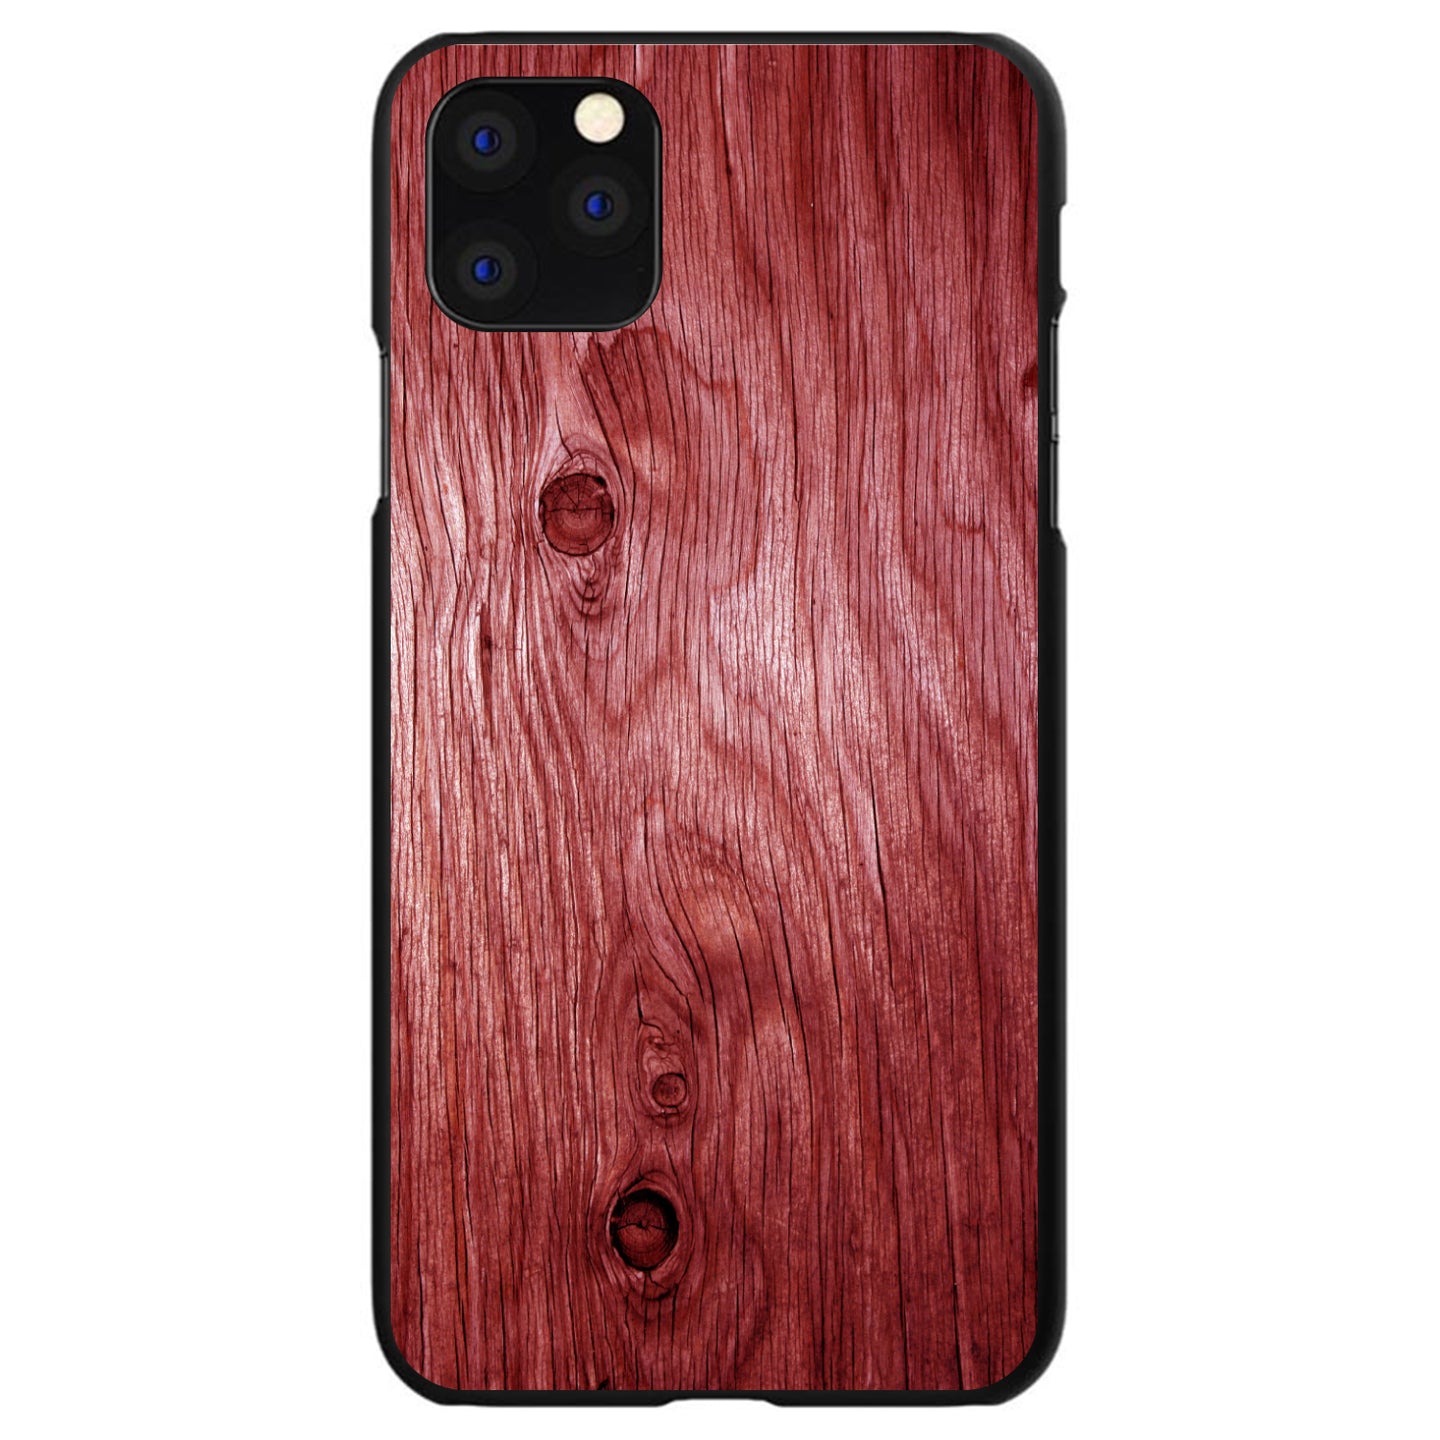 DistinctInk® Hard Plastic Snap-On Case for Apple iPhone or Samsung Galaxy - Dark Red Weathered Wood Grain Print